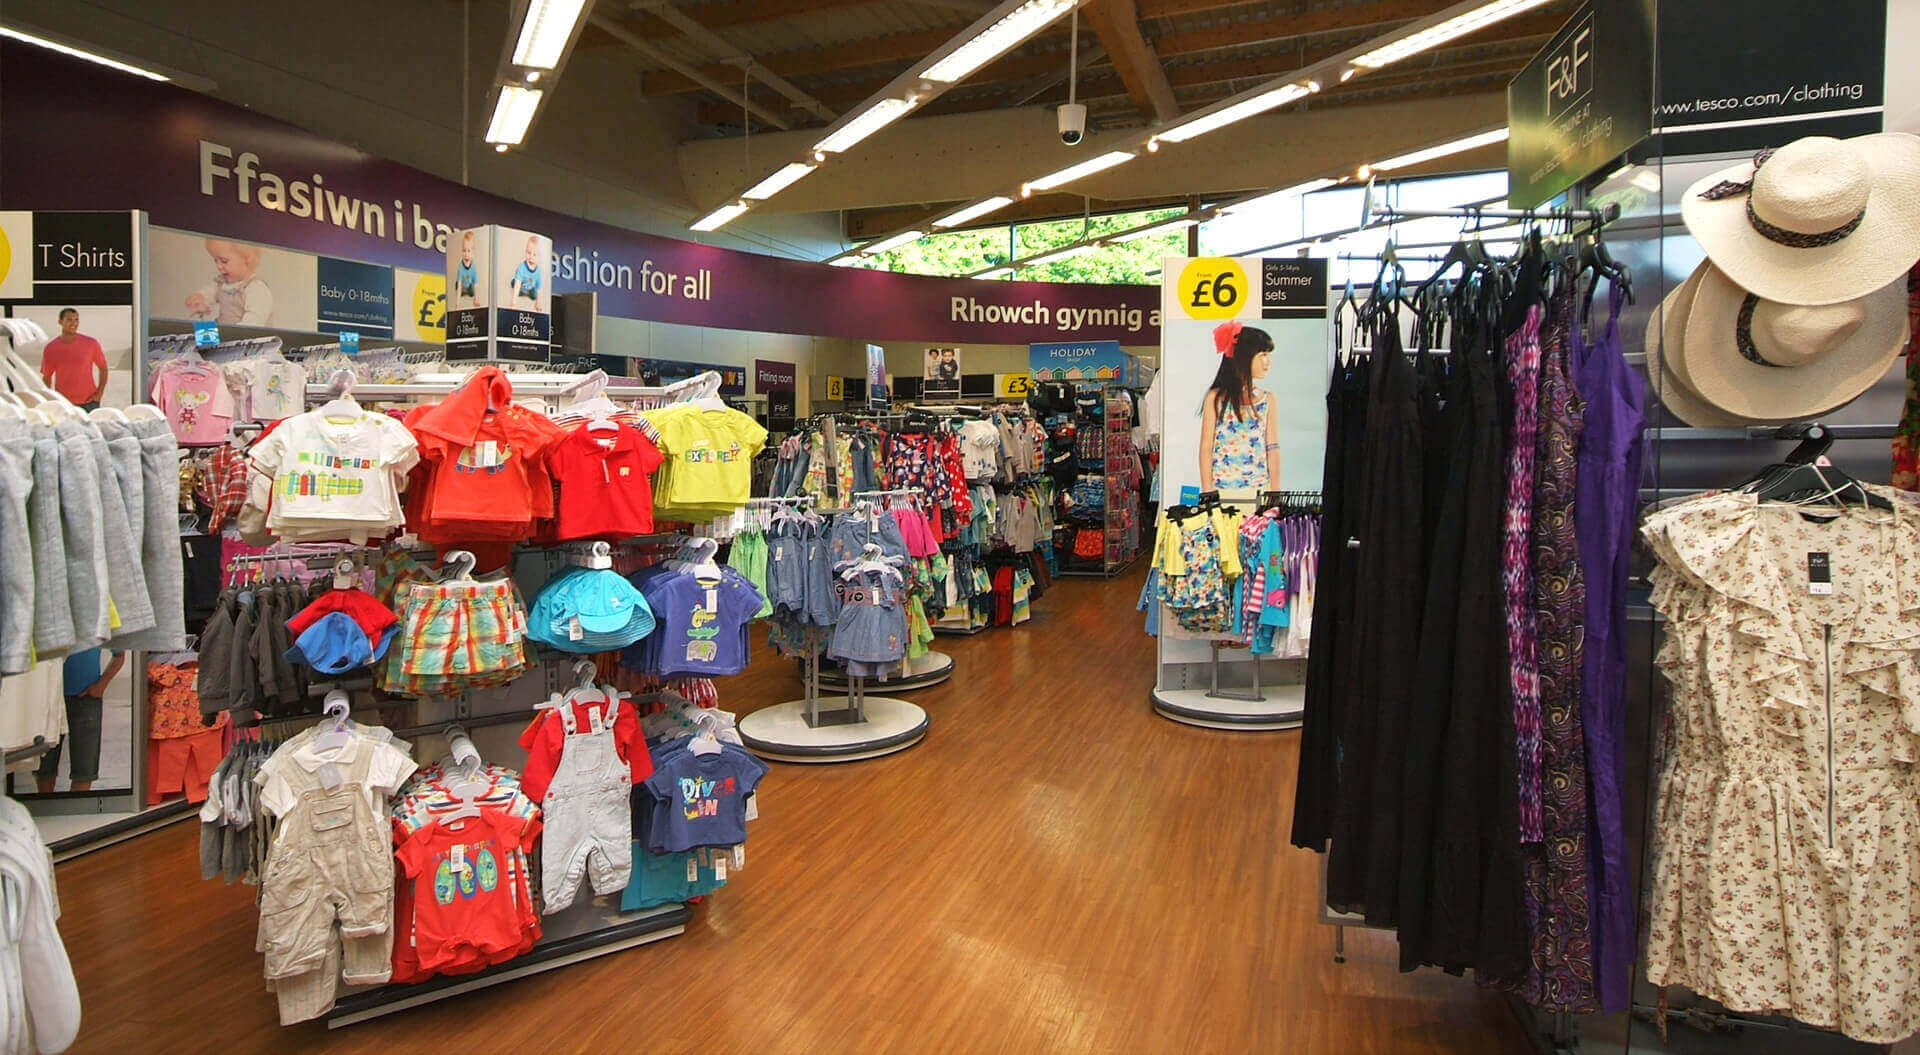  Florence and Fred Tesco fashion Welshpool retail store merchandising systems promotions and communications